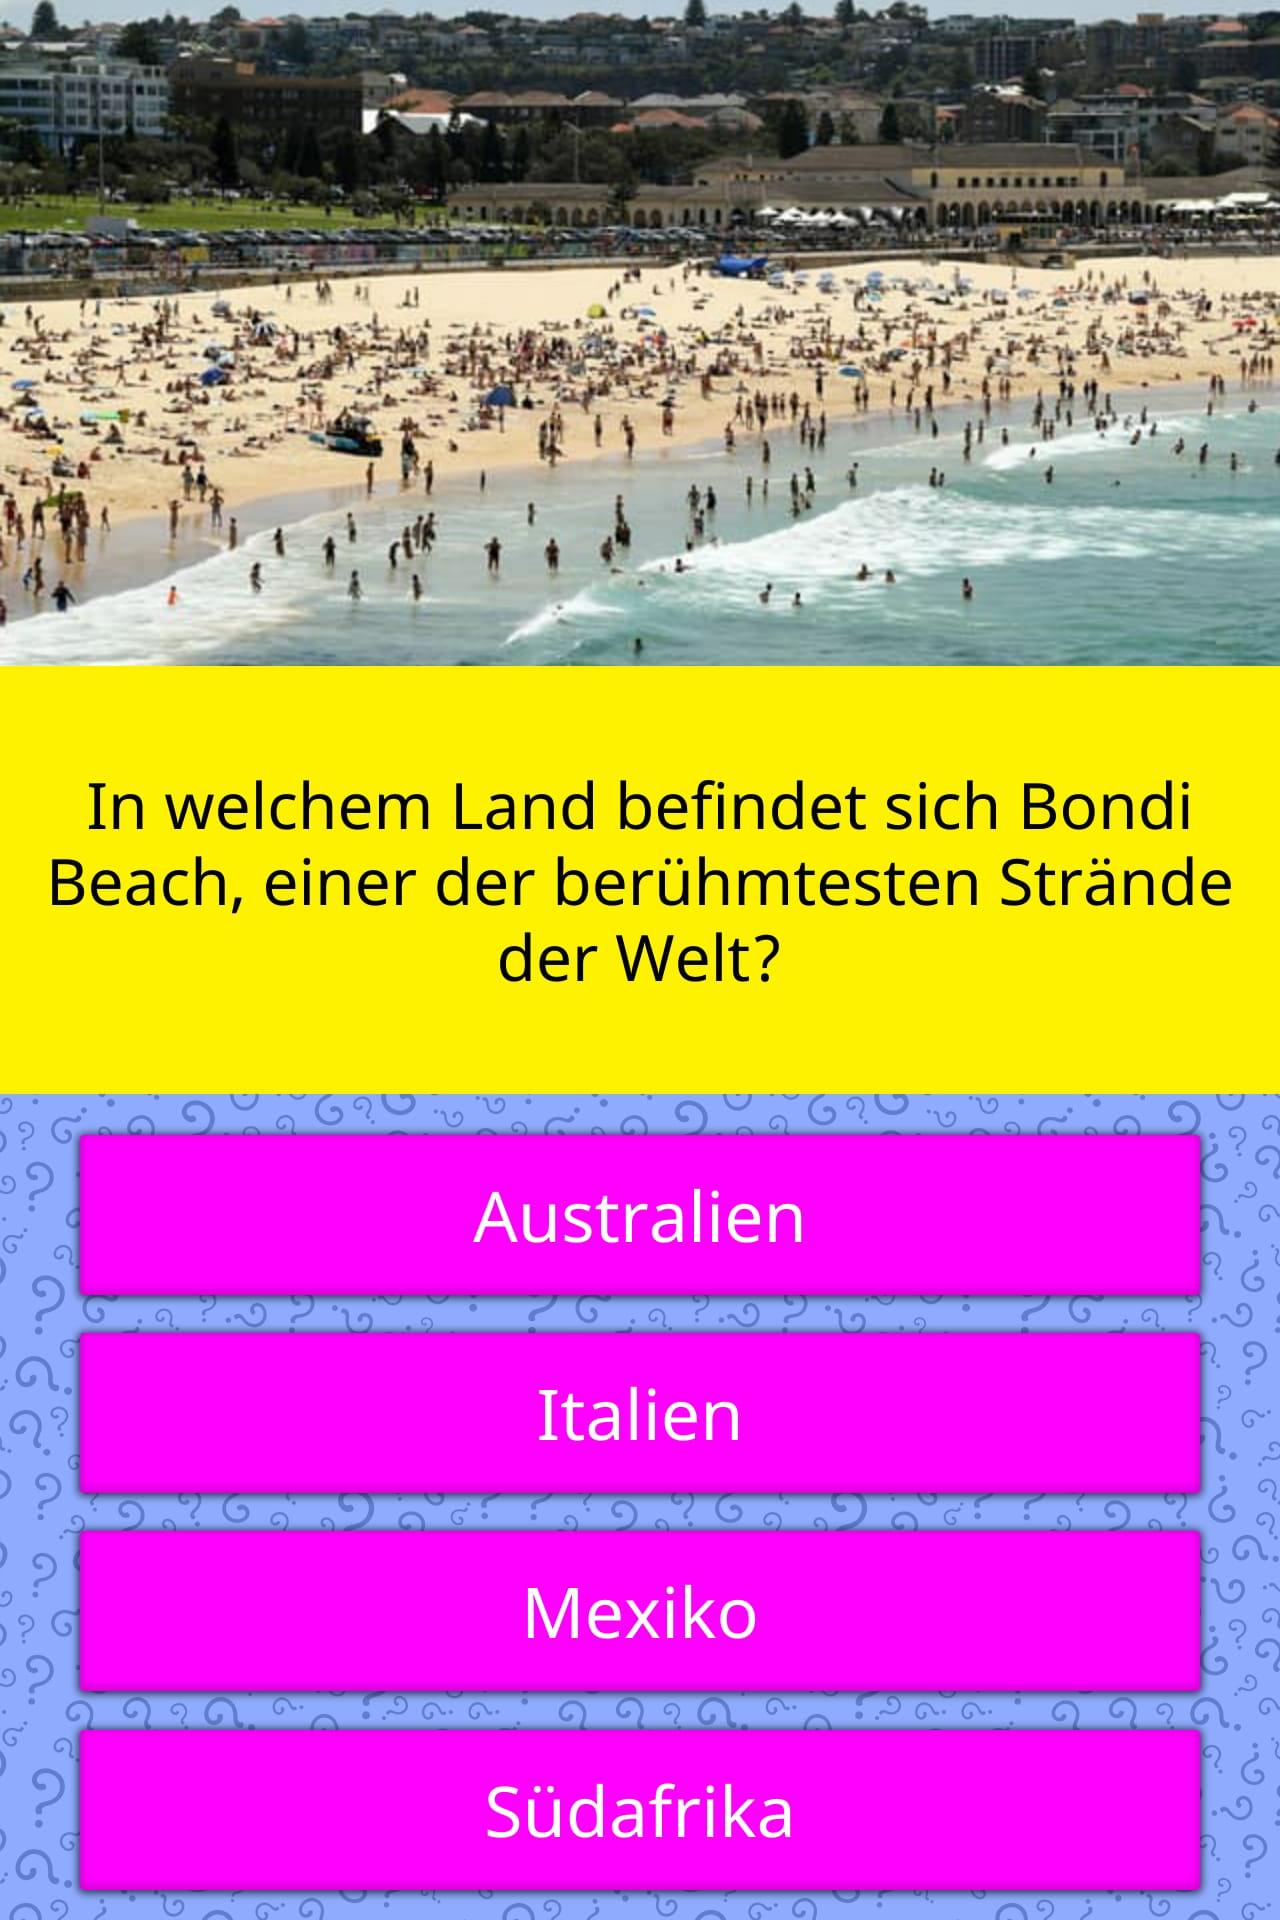 the-iconic-bondi-beach-is-located-in-trivia-questions-quizzclub